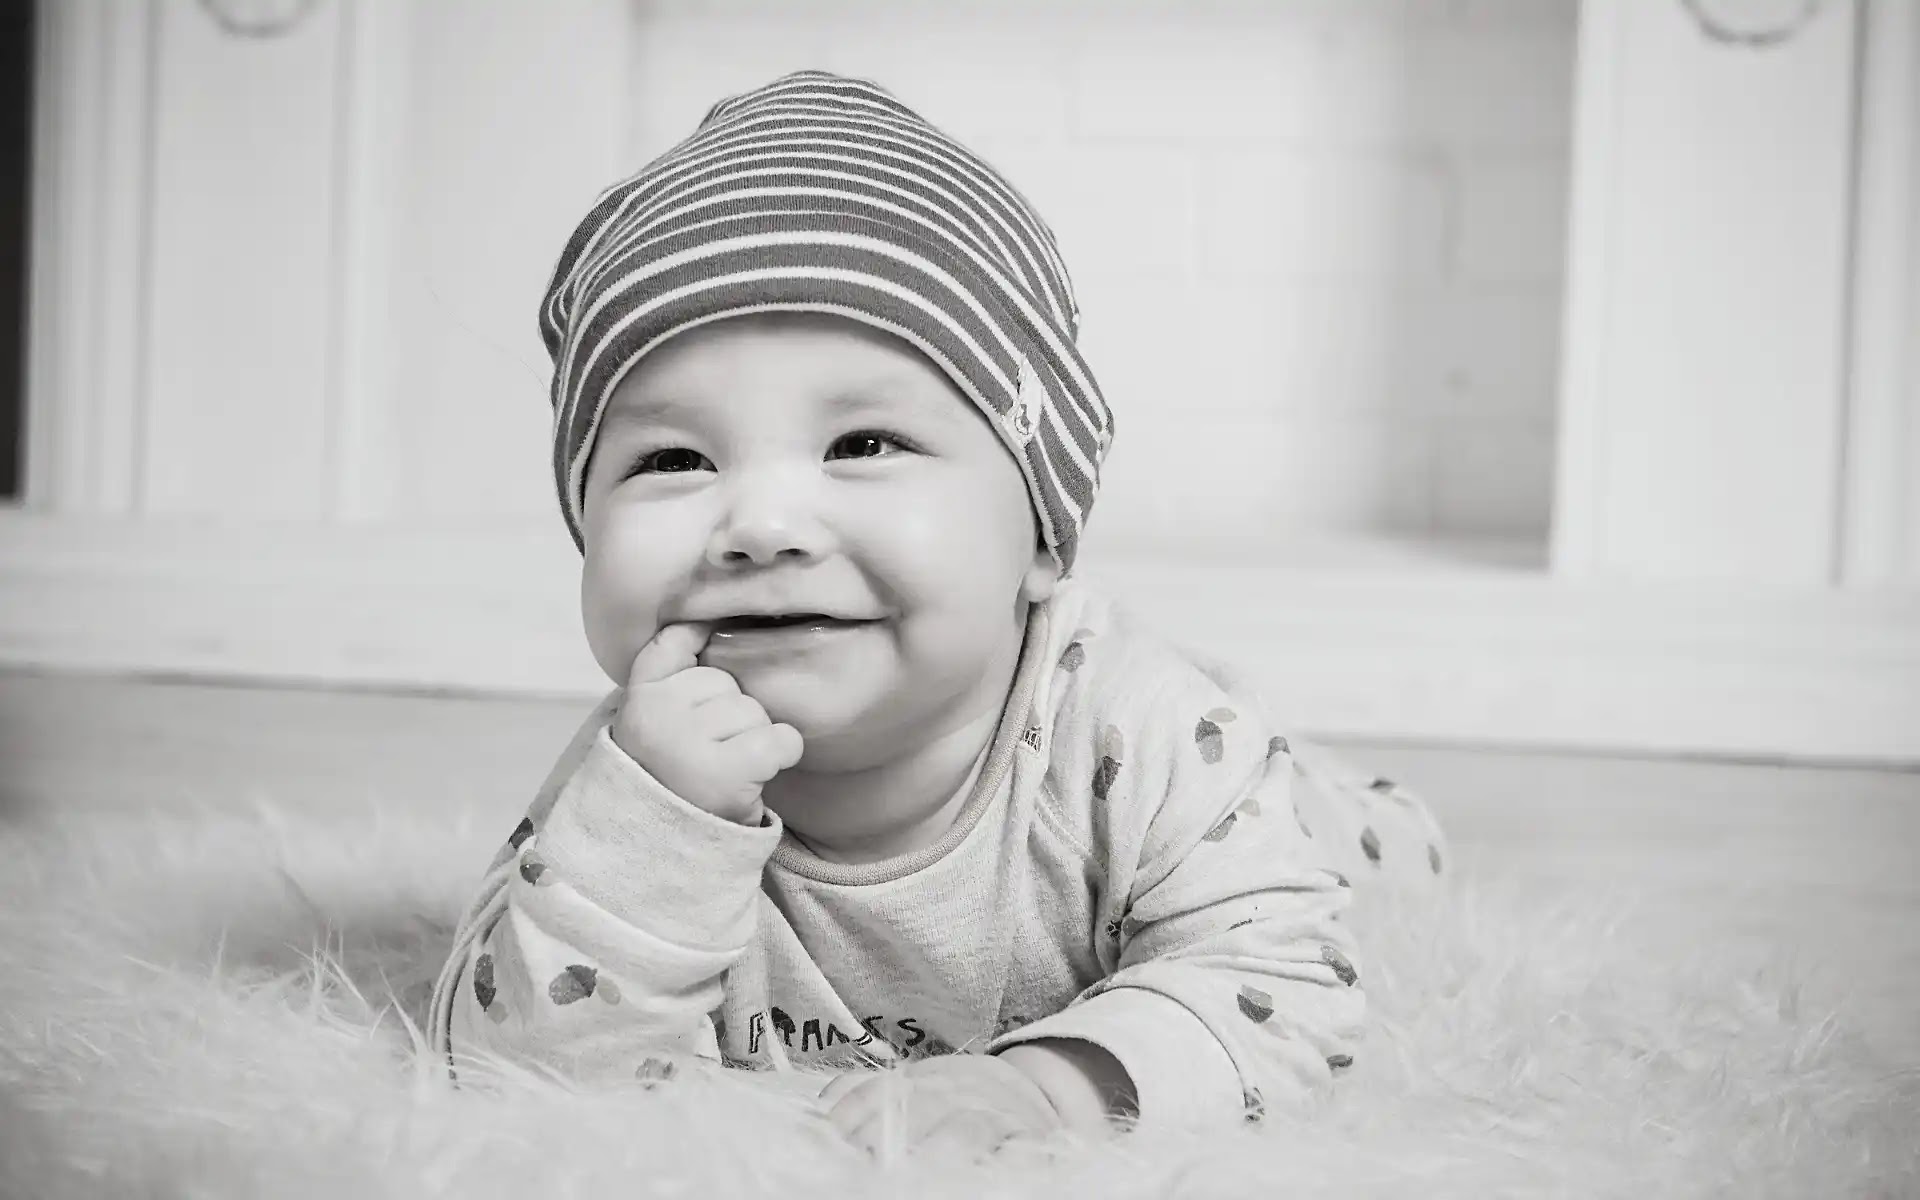 Black and white baby photo gallery